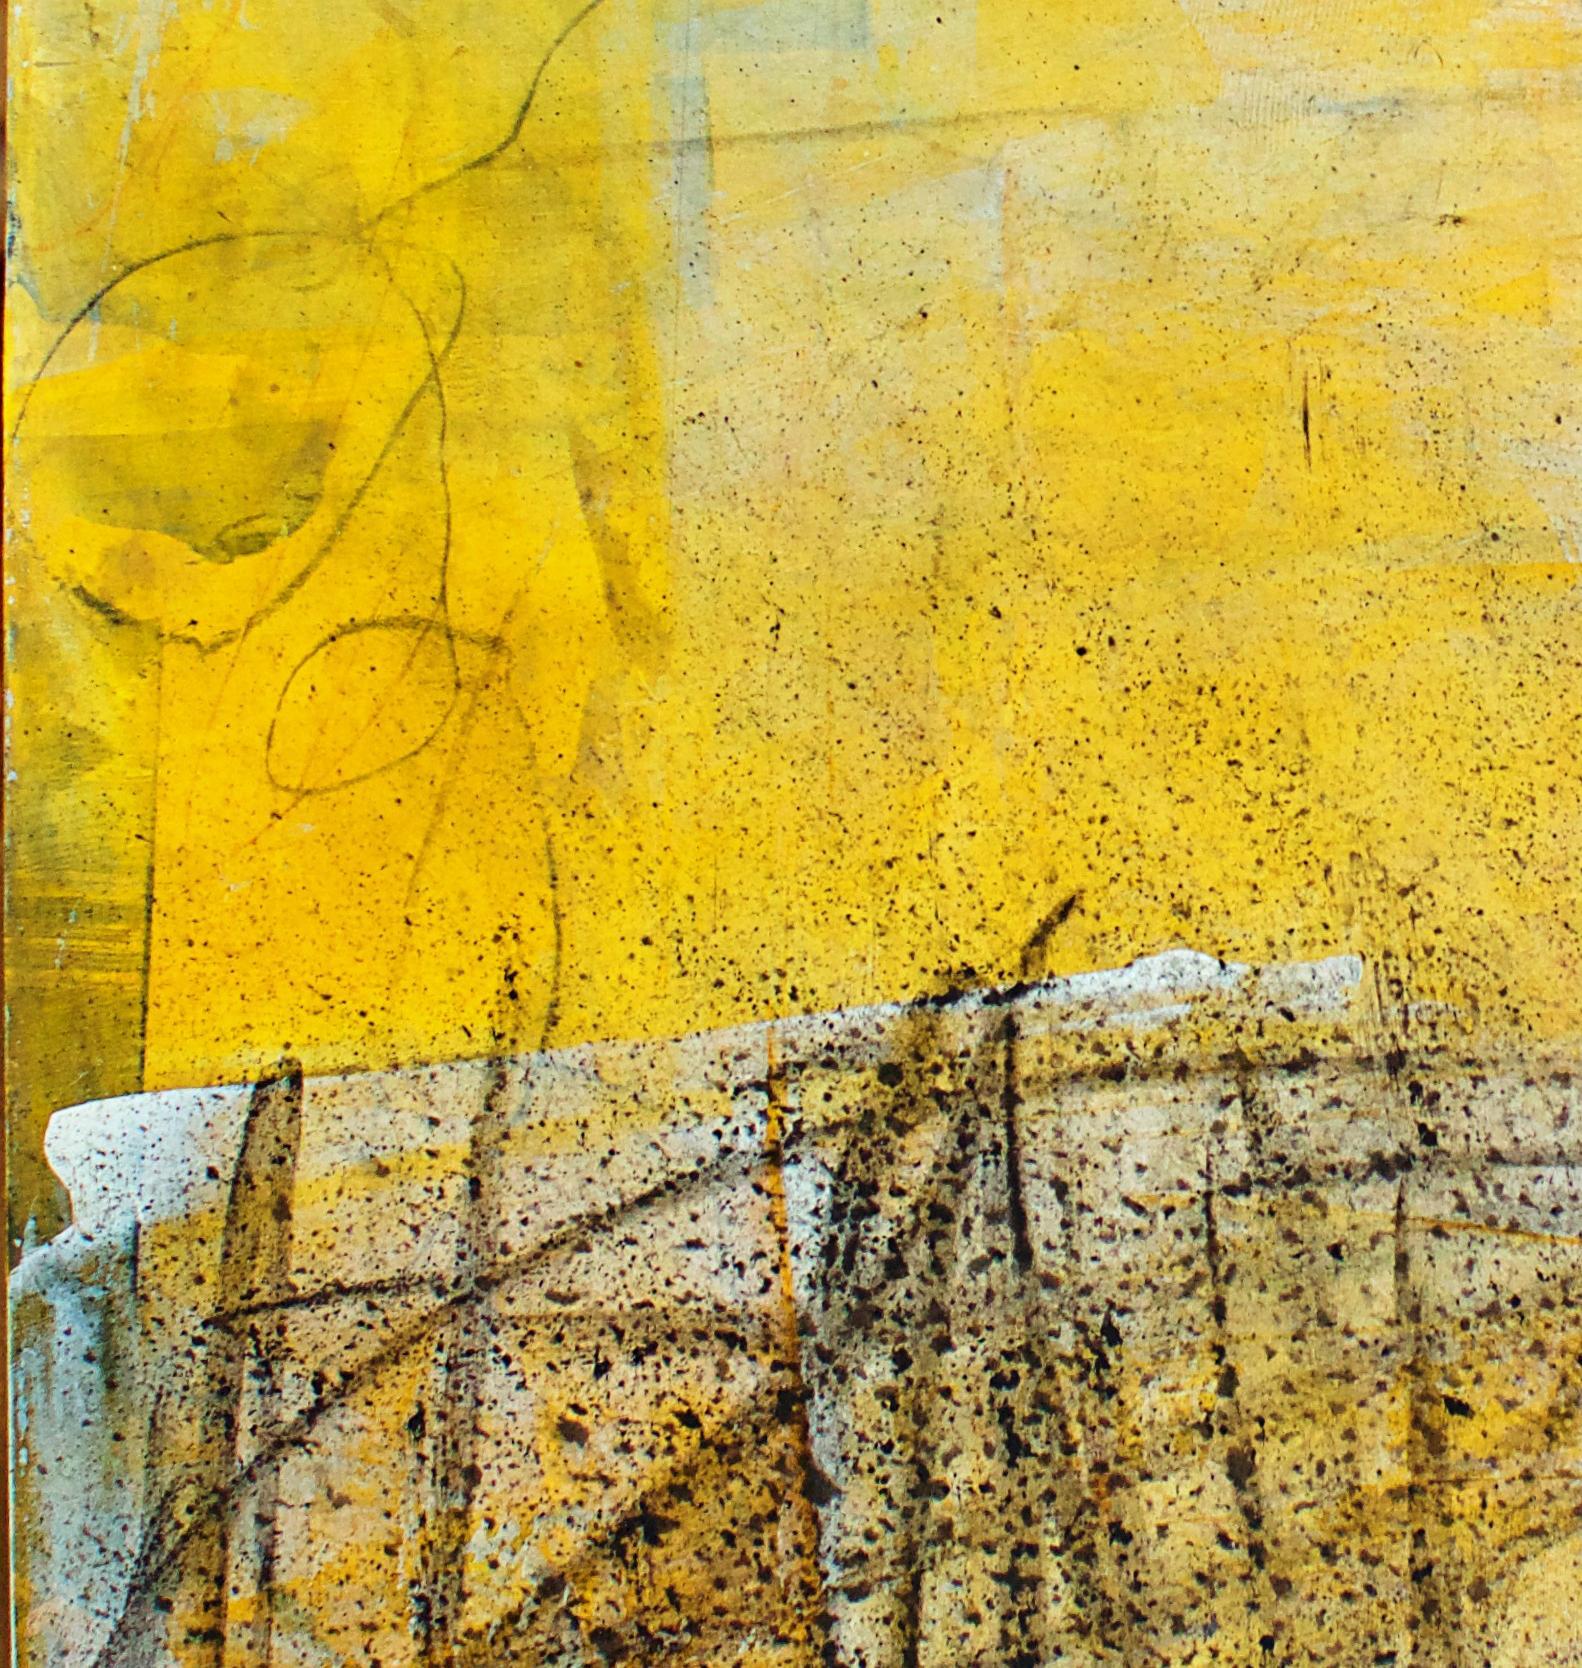 Contemporary American Modern Abstract Expressionist Mixed-Media on Board, Elliot Twelvetrees